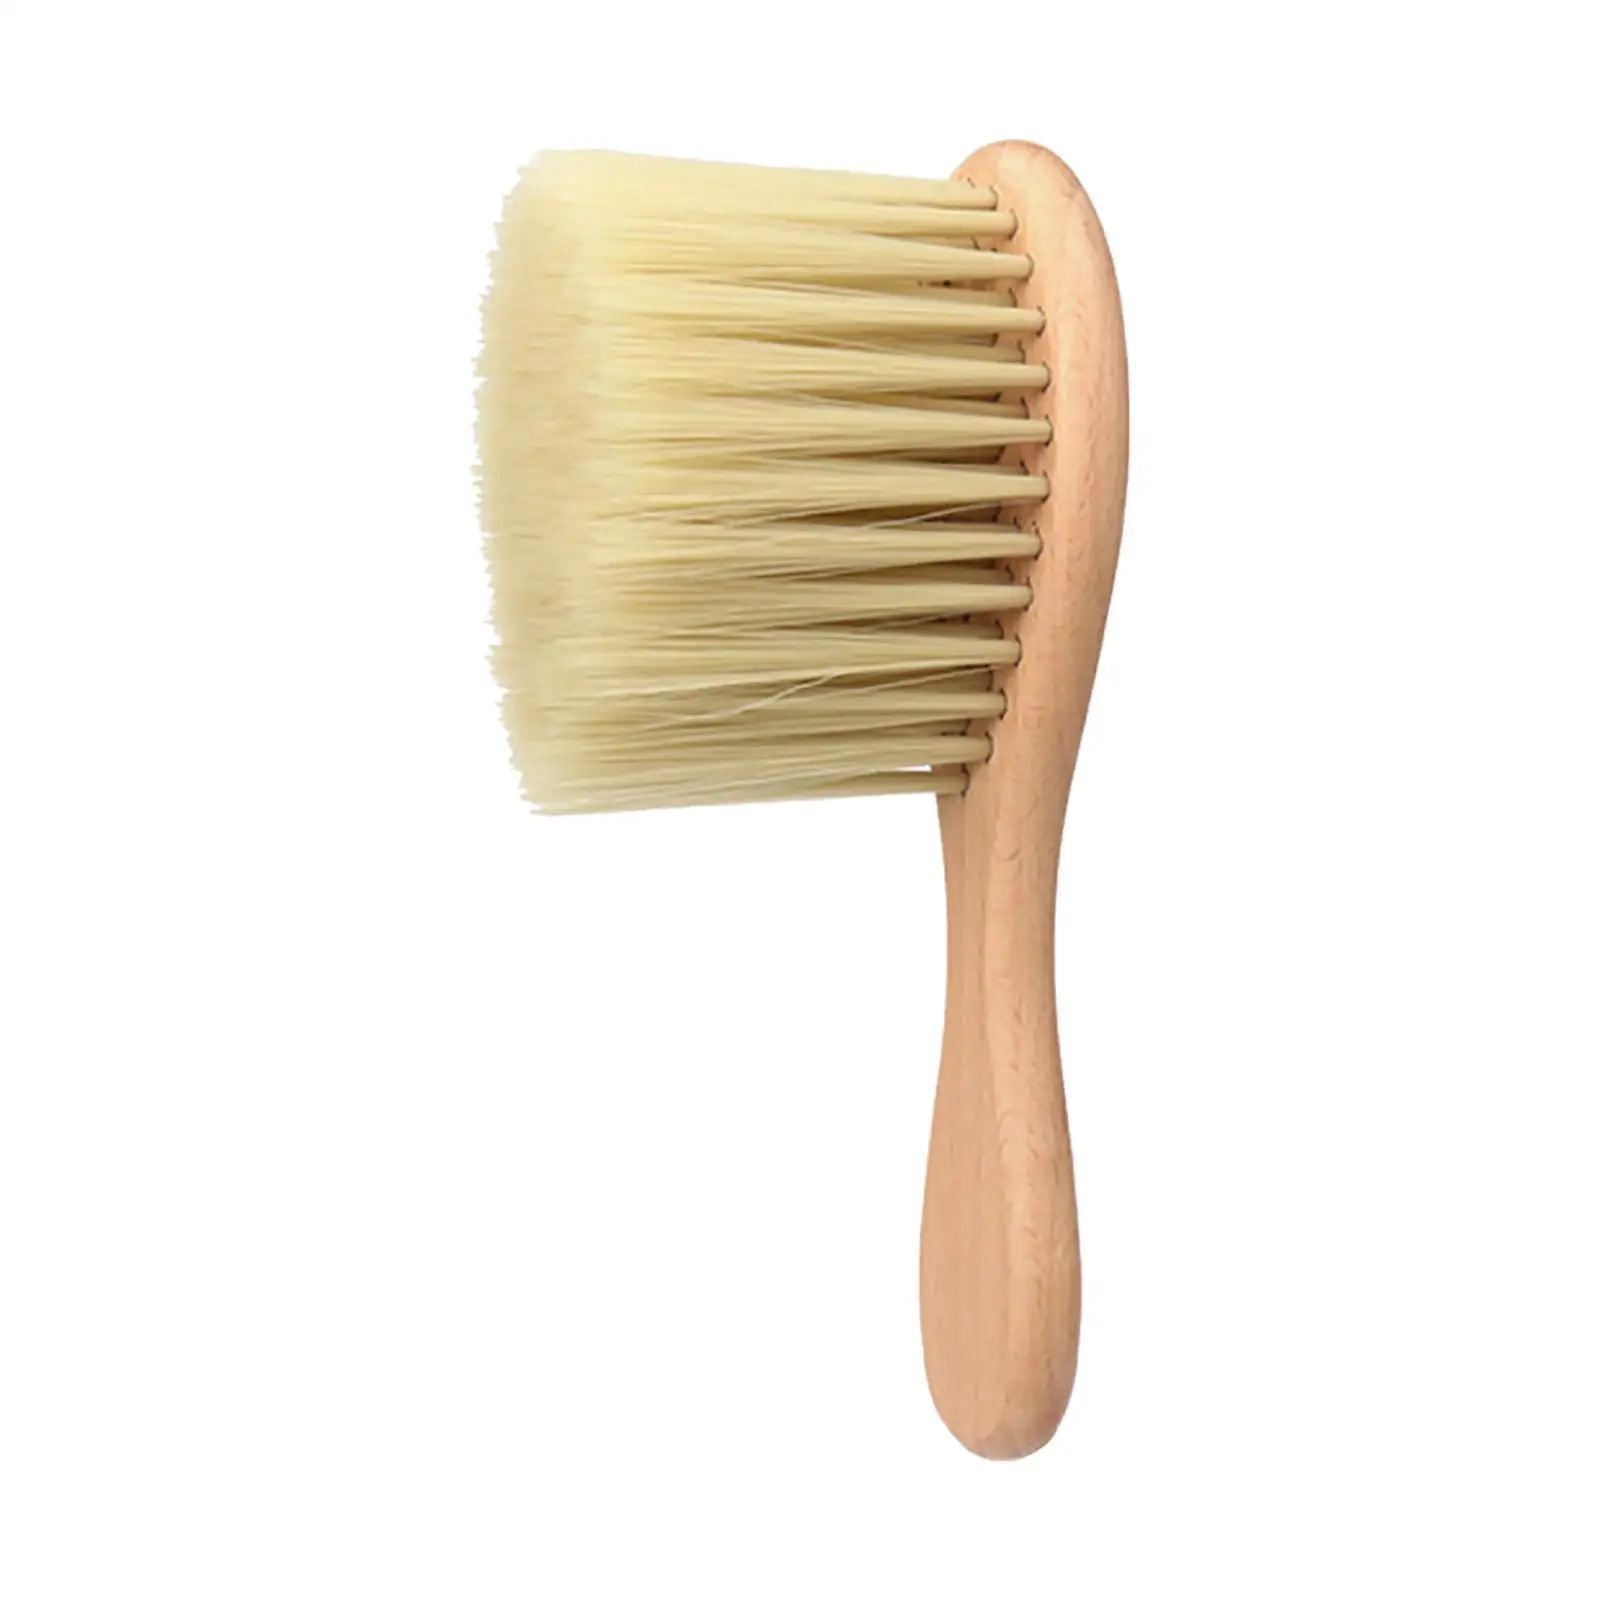 2x Barber Neck Cleaning Brush, Professional Wooden Soft Nylon Hair Cutting Brush